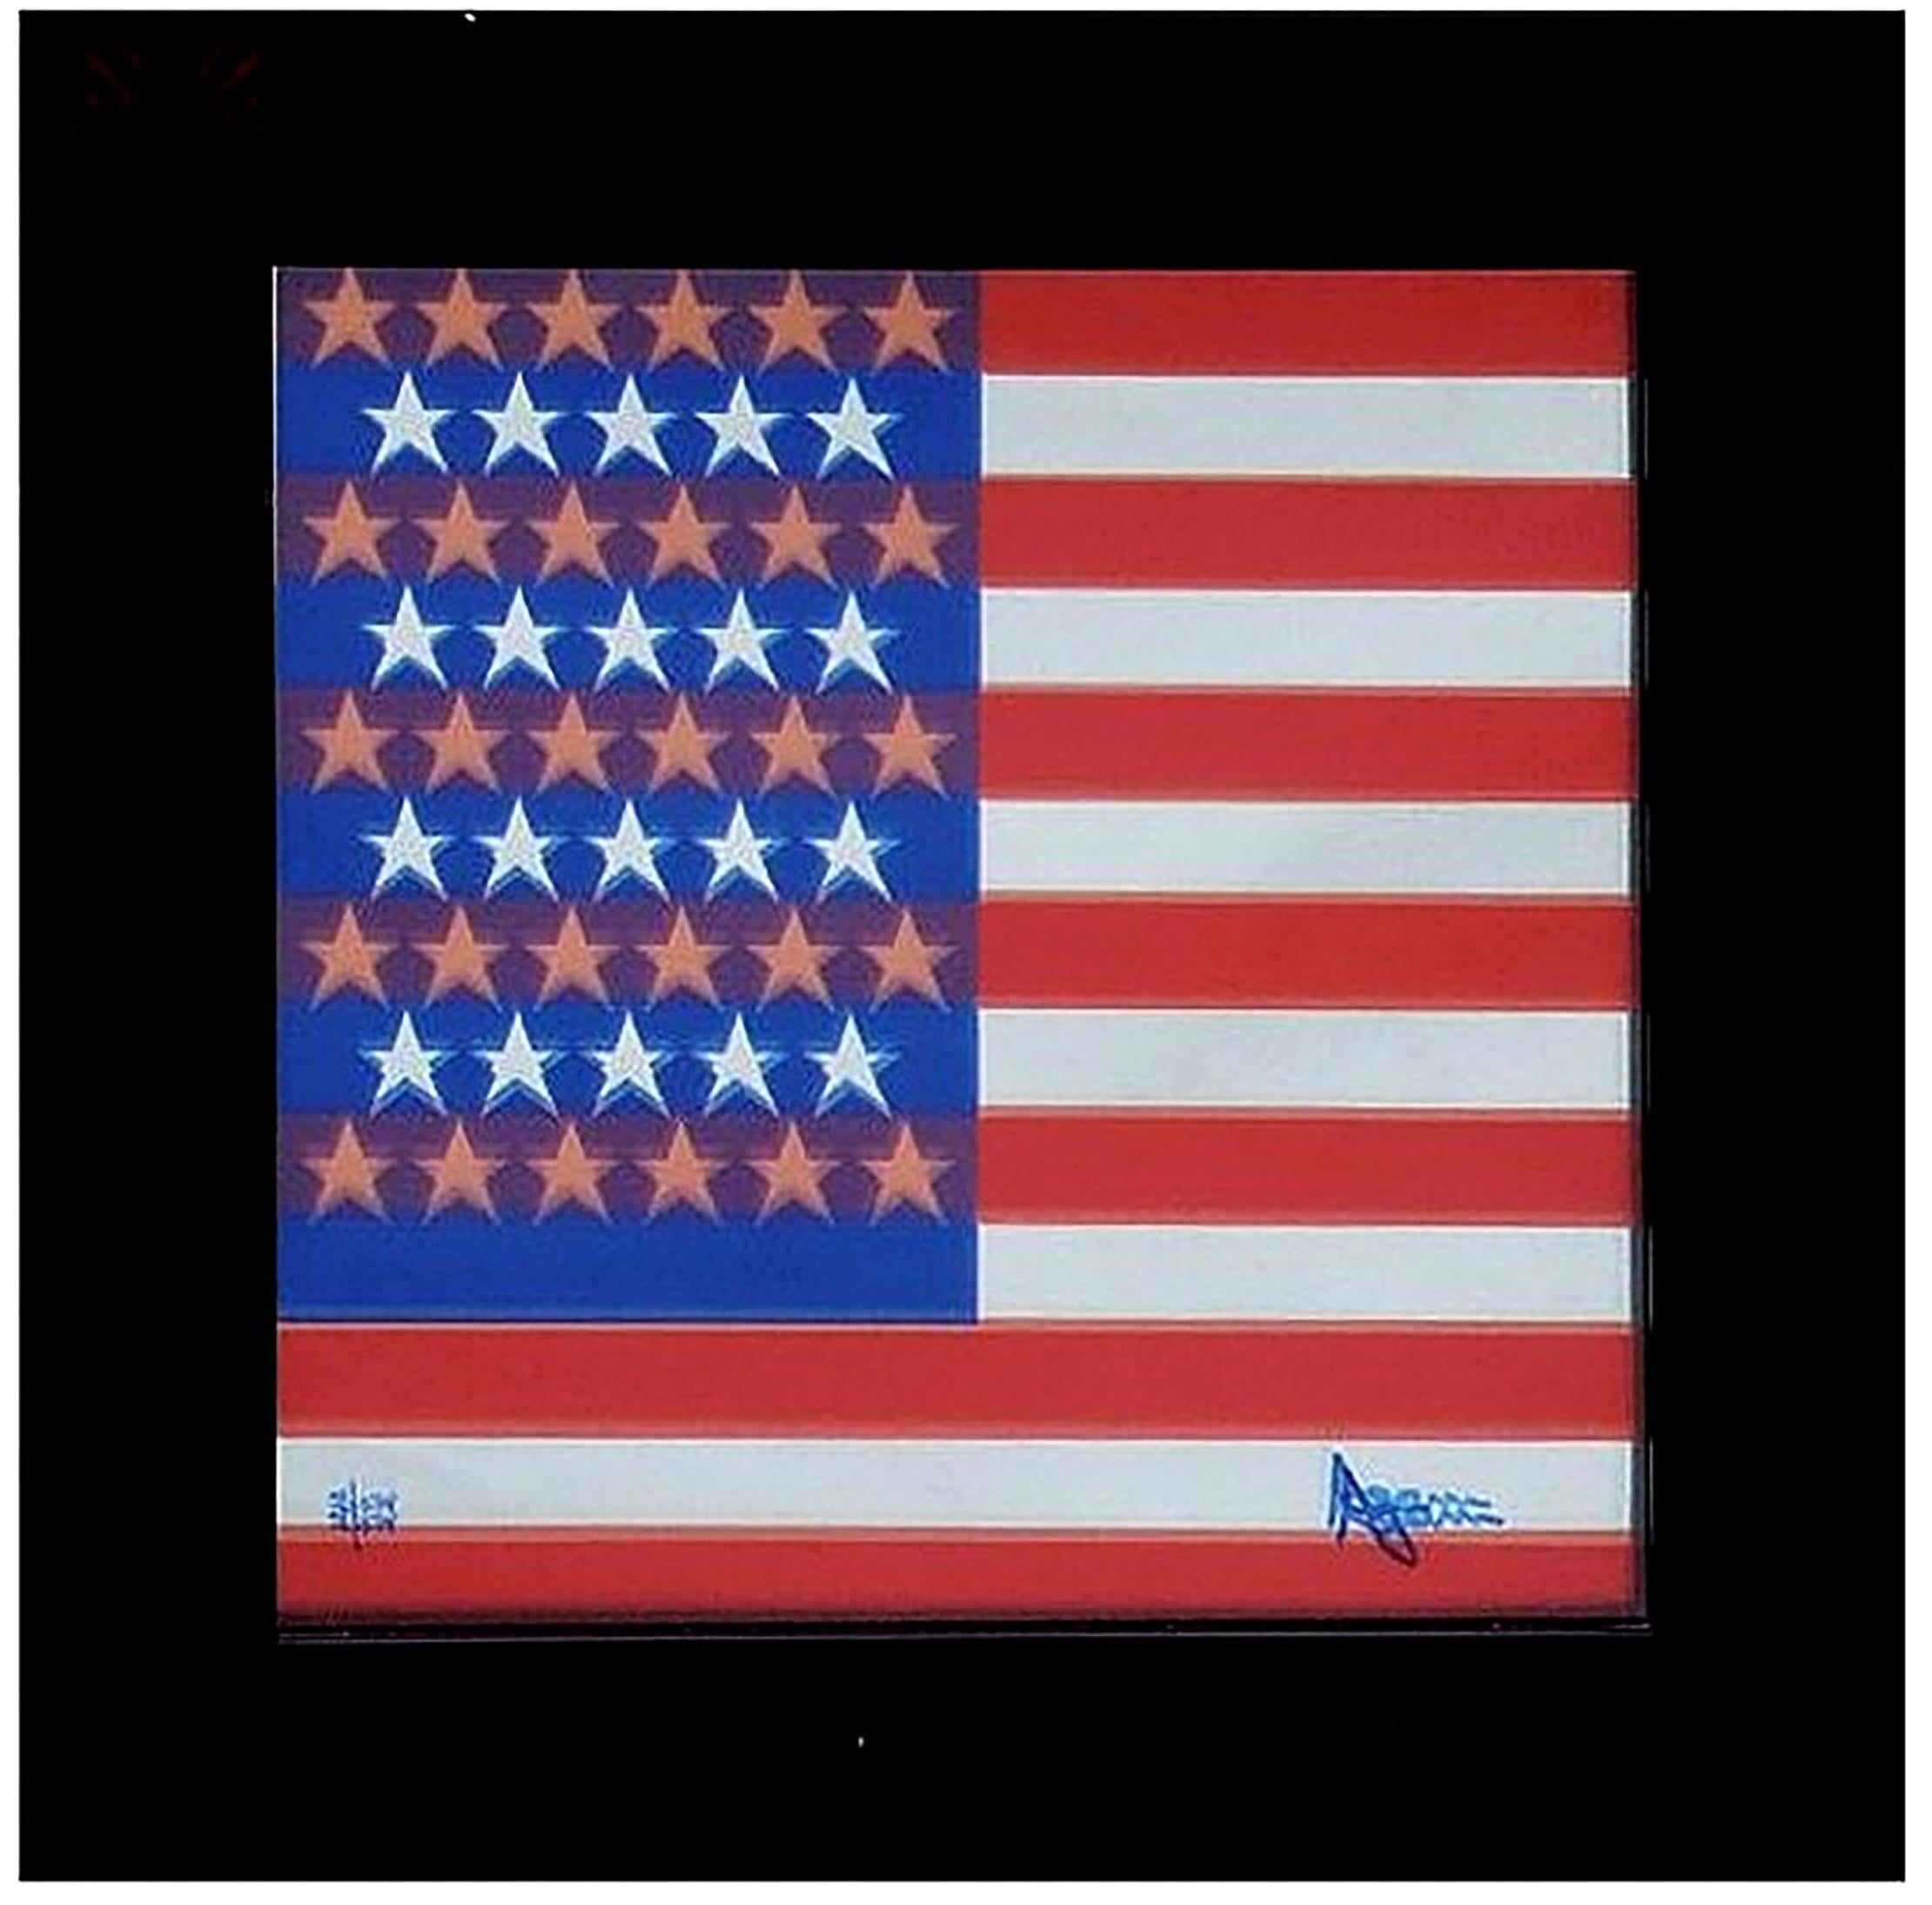 Agam - AMERICAN FLAG
1976
Work realized on the occasion of the bicentenary of the United States!
Silkscreen on mirror / Agamograph
Signed in felt-tip 22/75 